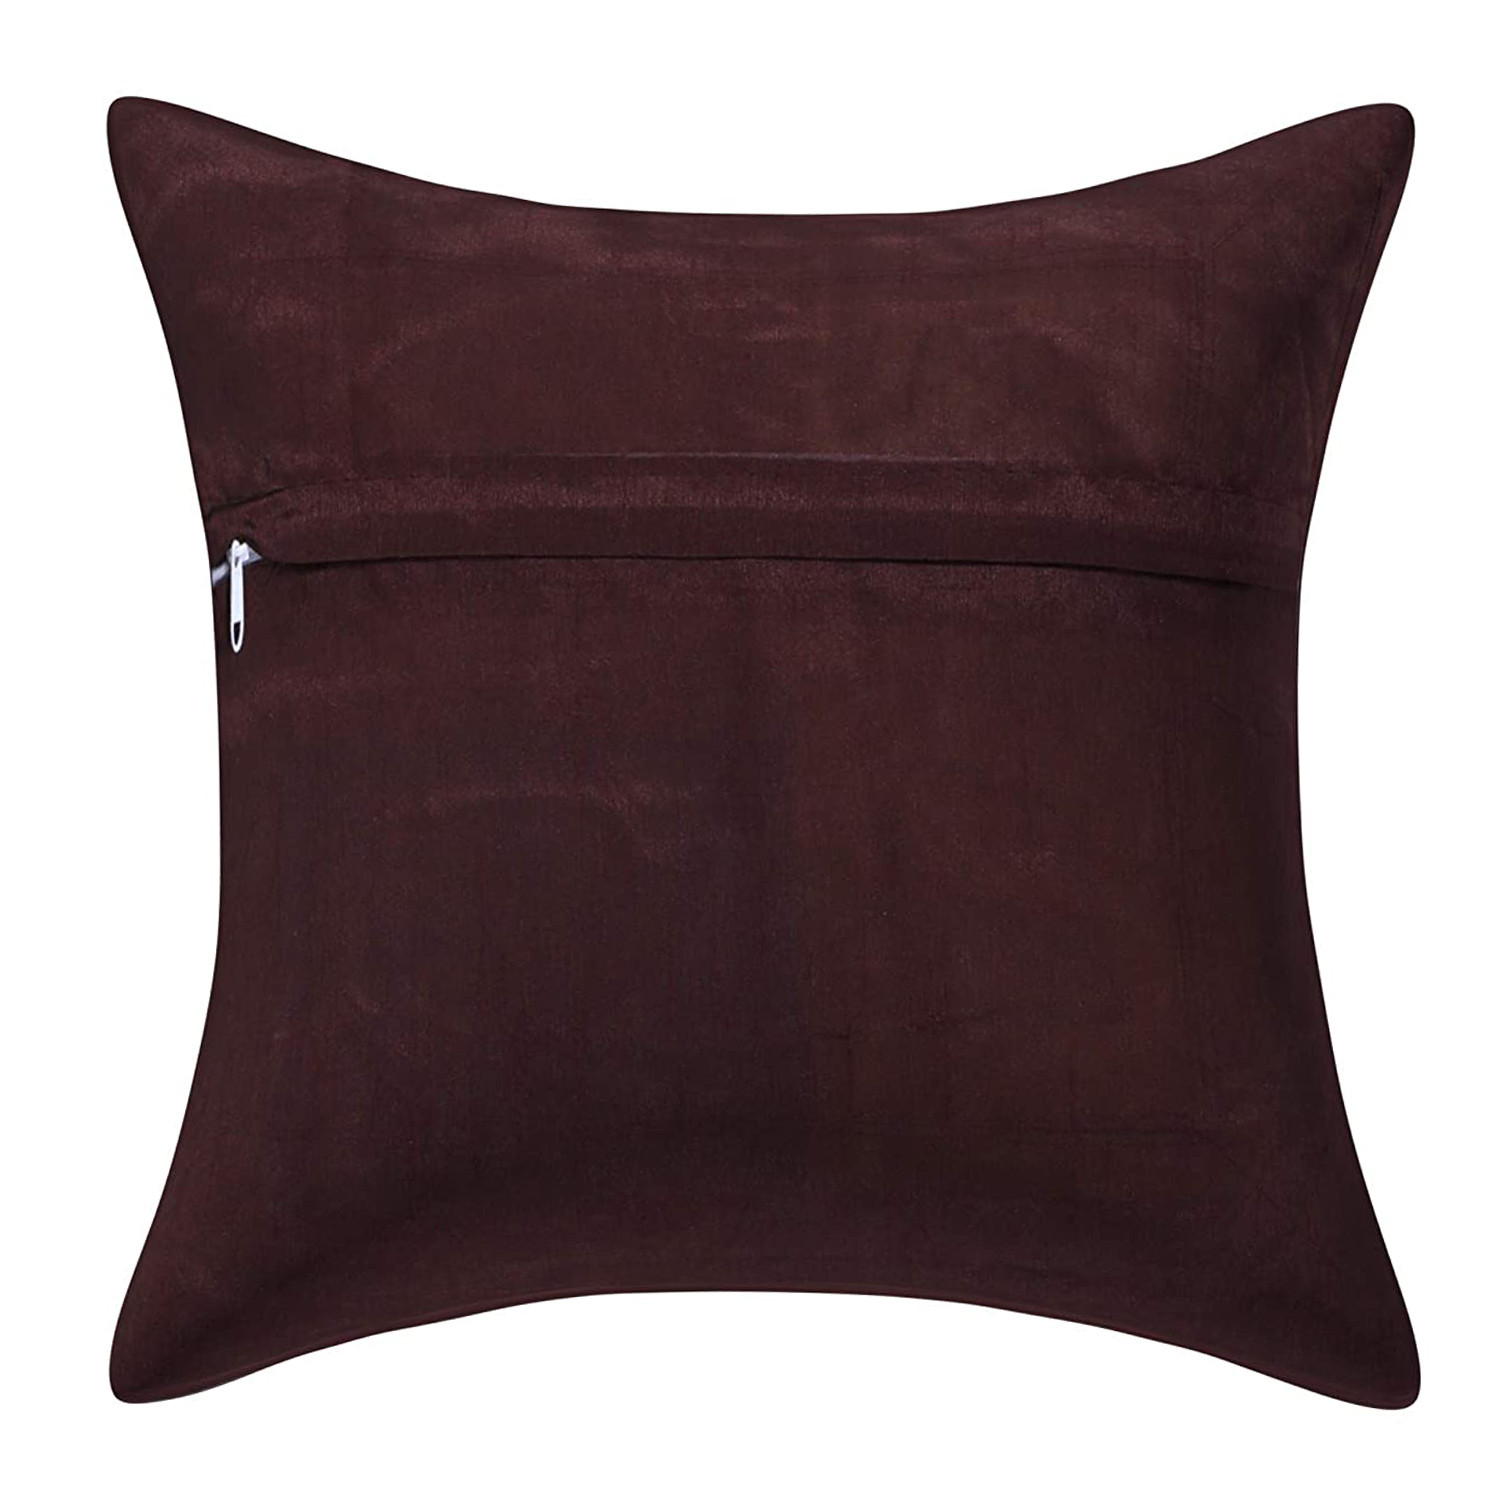 Kuber Industries Printed Soft Decorative Square Throw Pillow Cover, Cushion Covers, Pillow Case For Sofa Couch Bed Chair 16x16 Inch-(Brown)-HS_38_KUBMART21731